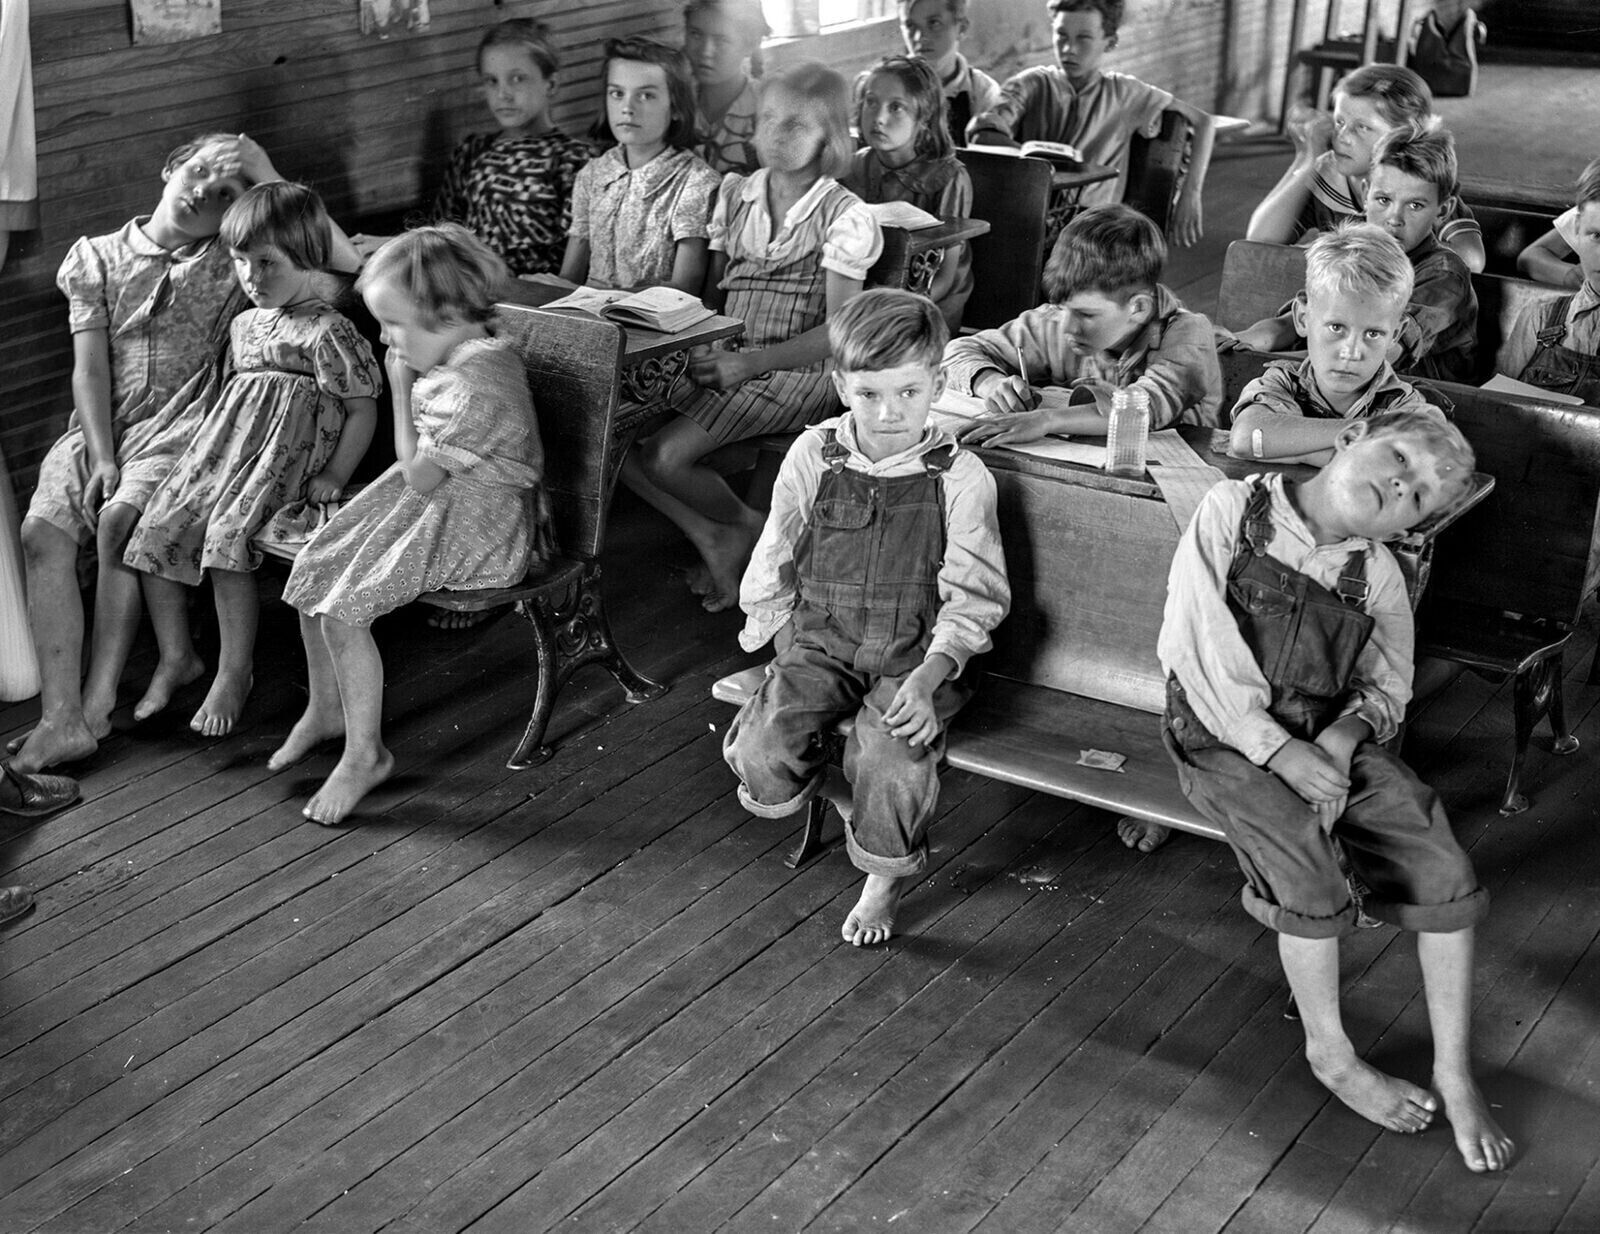 1940 DEPRESSION ERA SCHOOL ROOM with Barefoot Students Poster Photo 11x17